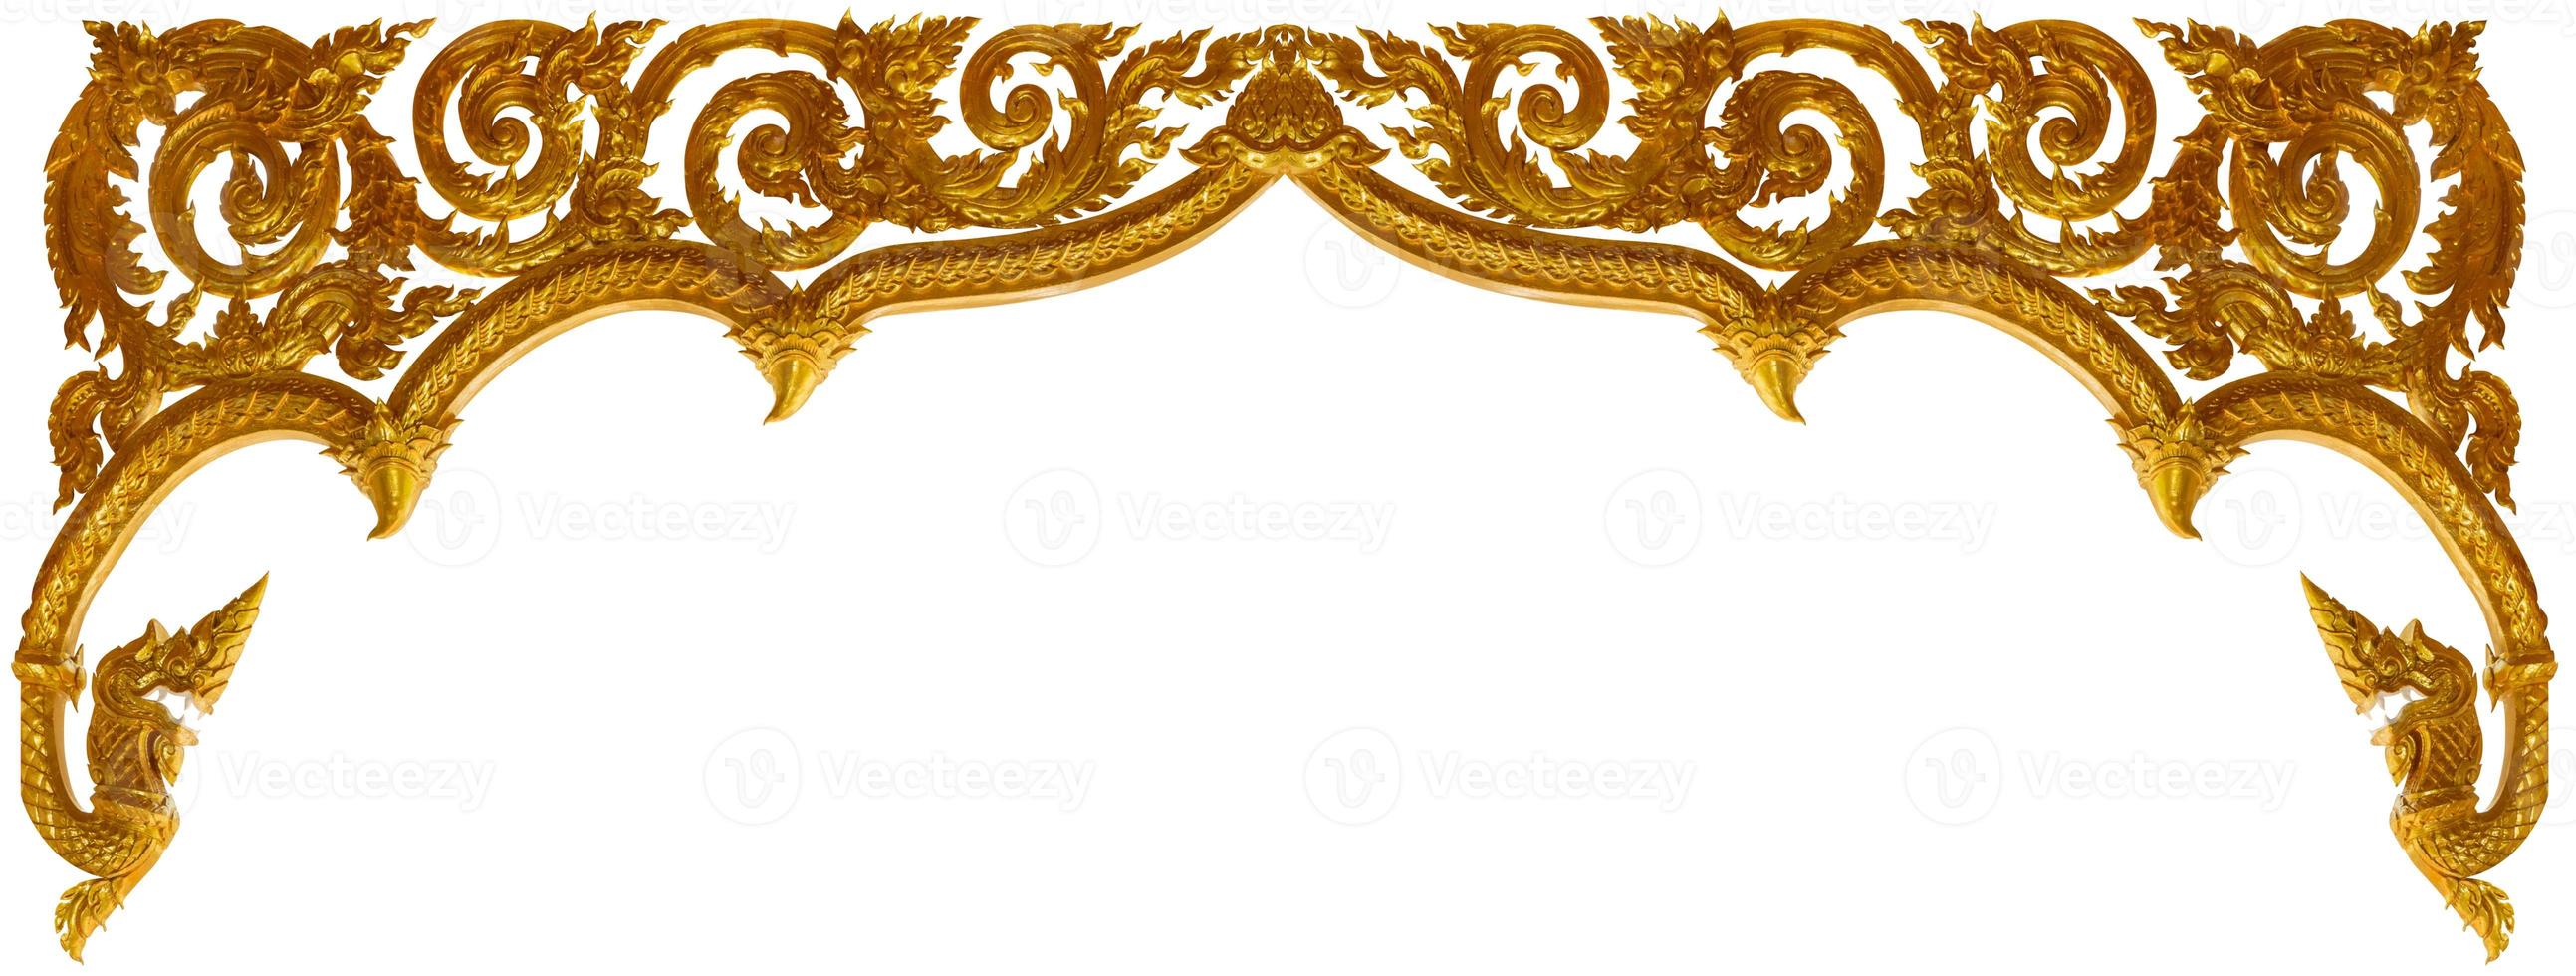 Gold carved ornament frame art isolated on white background photo